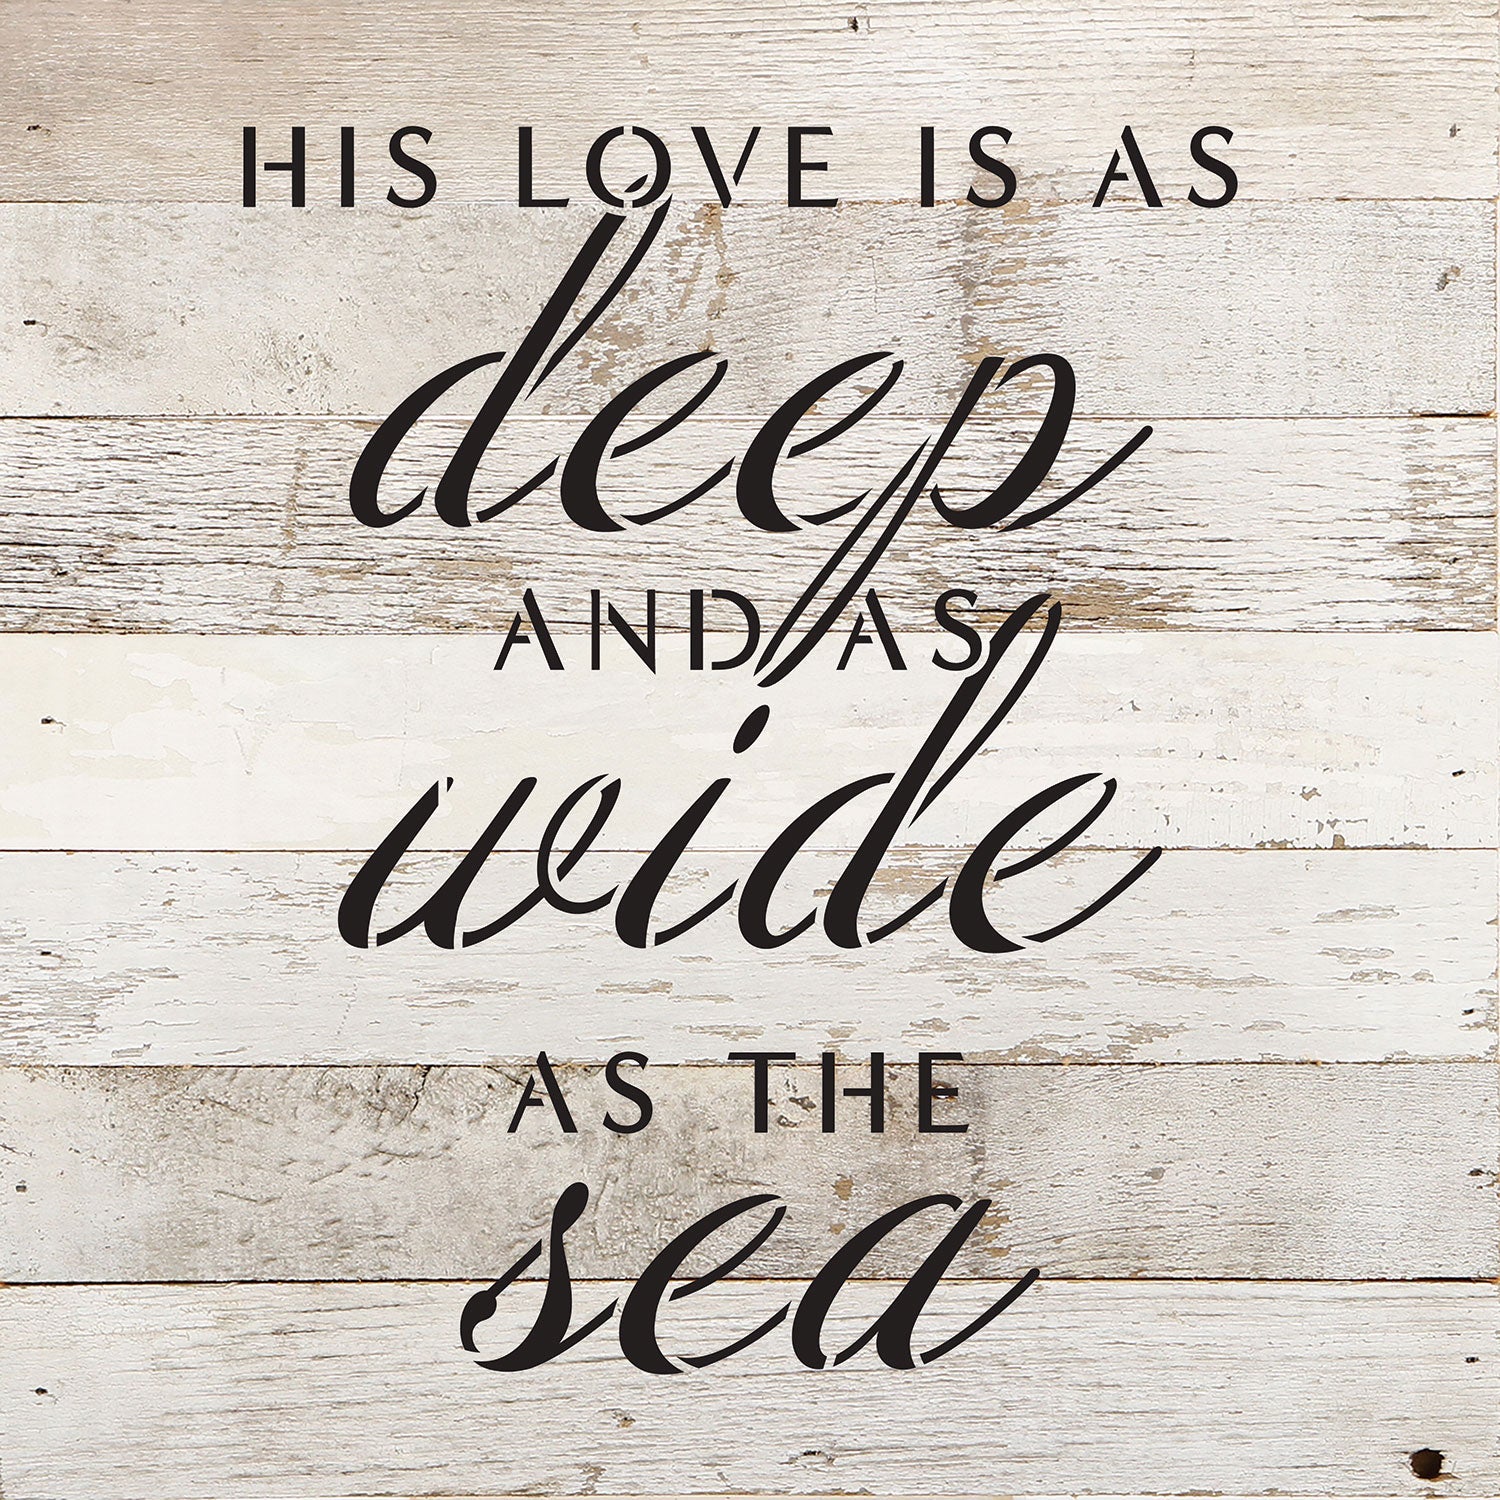 His love is as deep and as wide as the sea / 10x10 Reclaimed Wood Wall Decor Sign